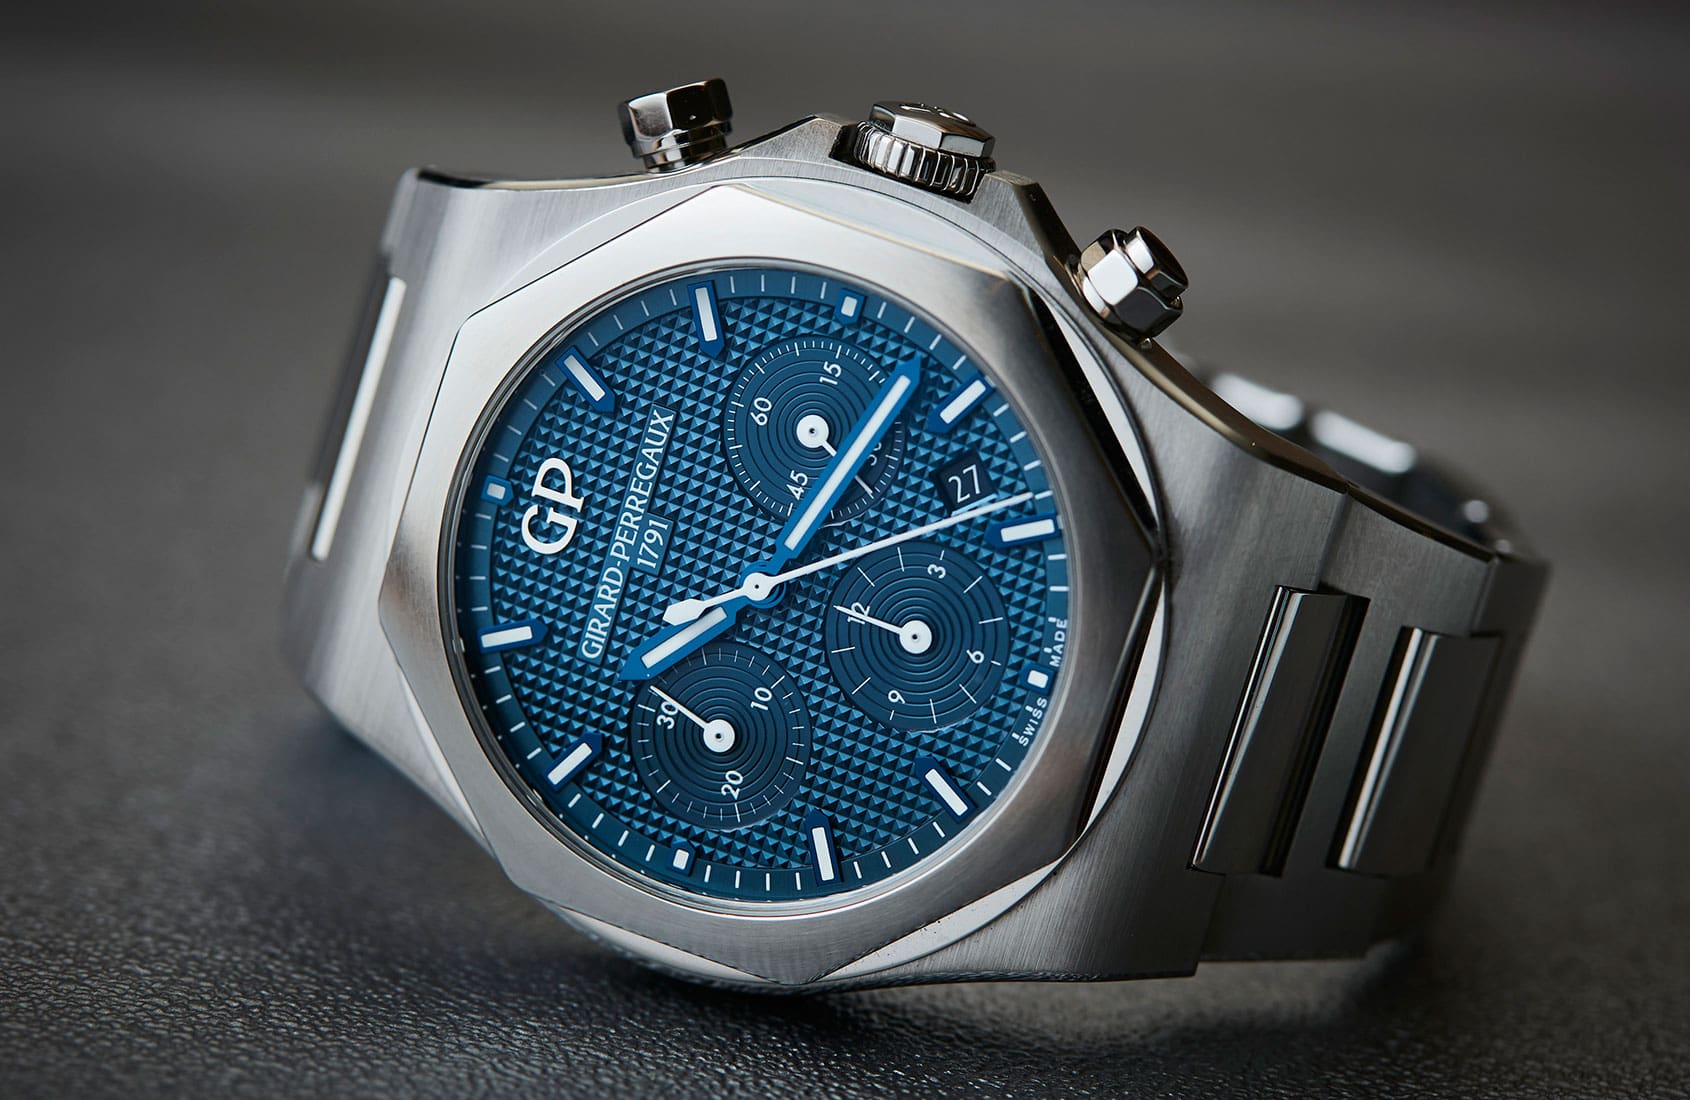 Why I bought the 42mm Girard-Perregaux Laureato Chronograph with blue dial (and drank my own Kool-Aid)